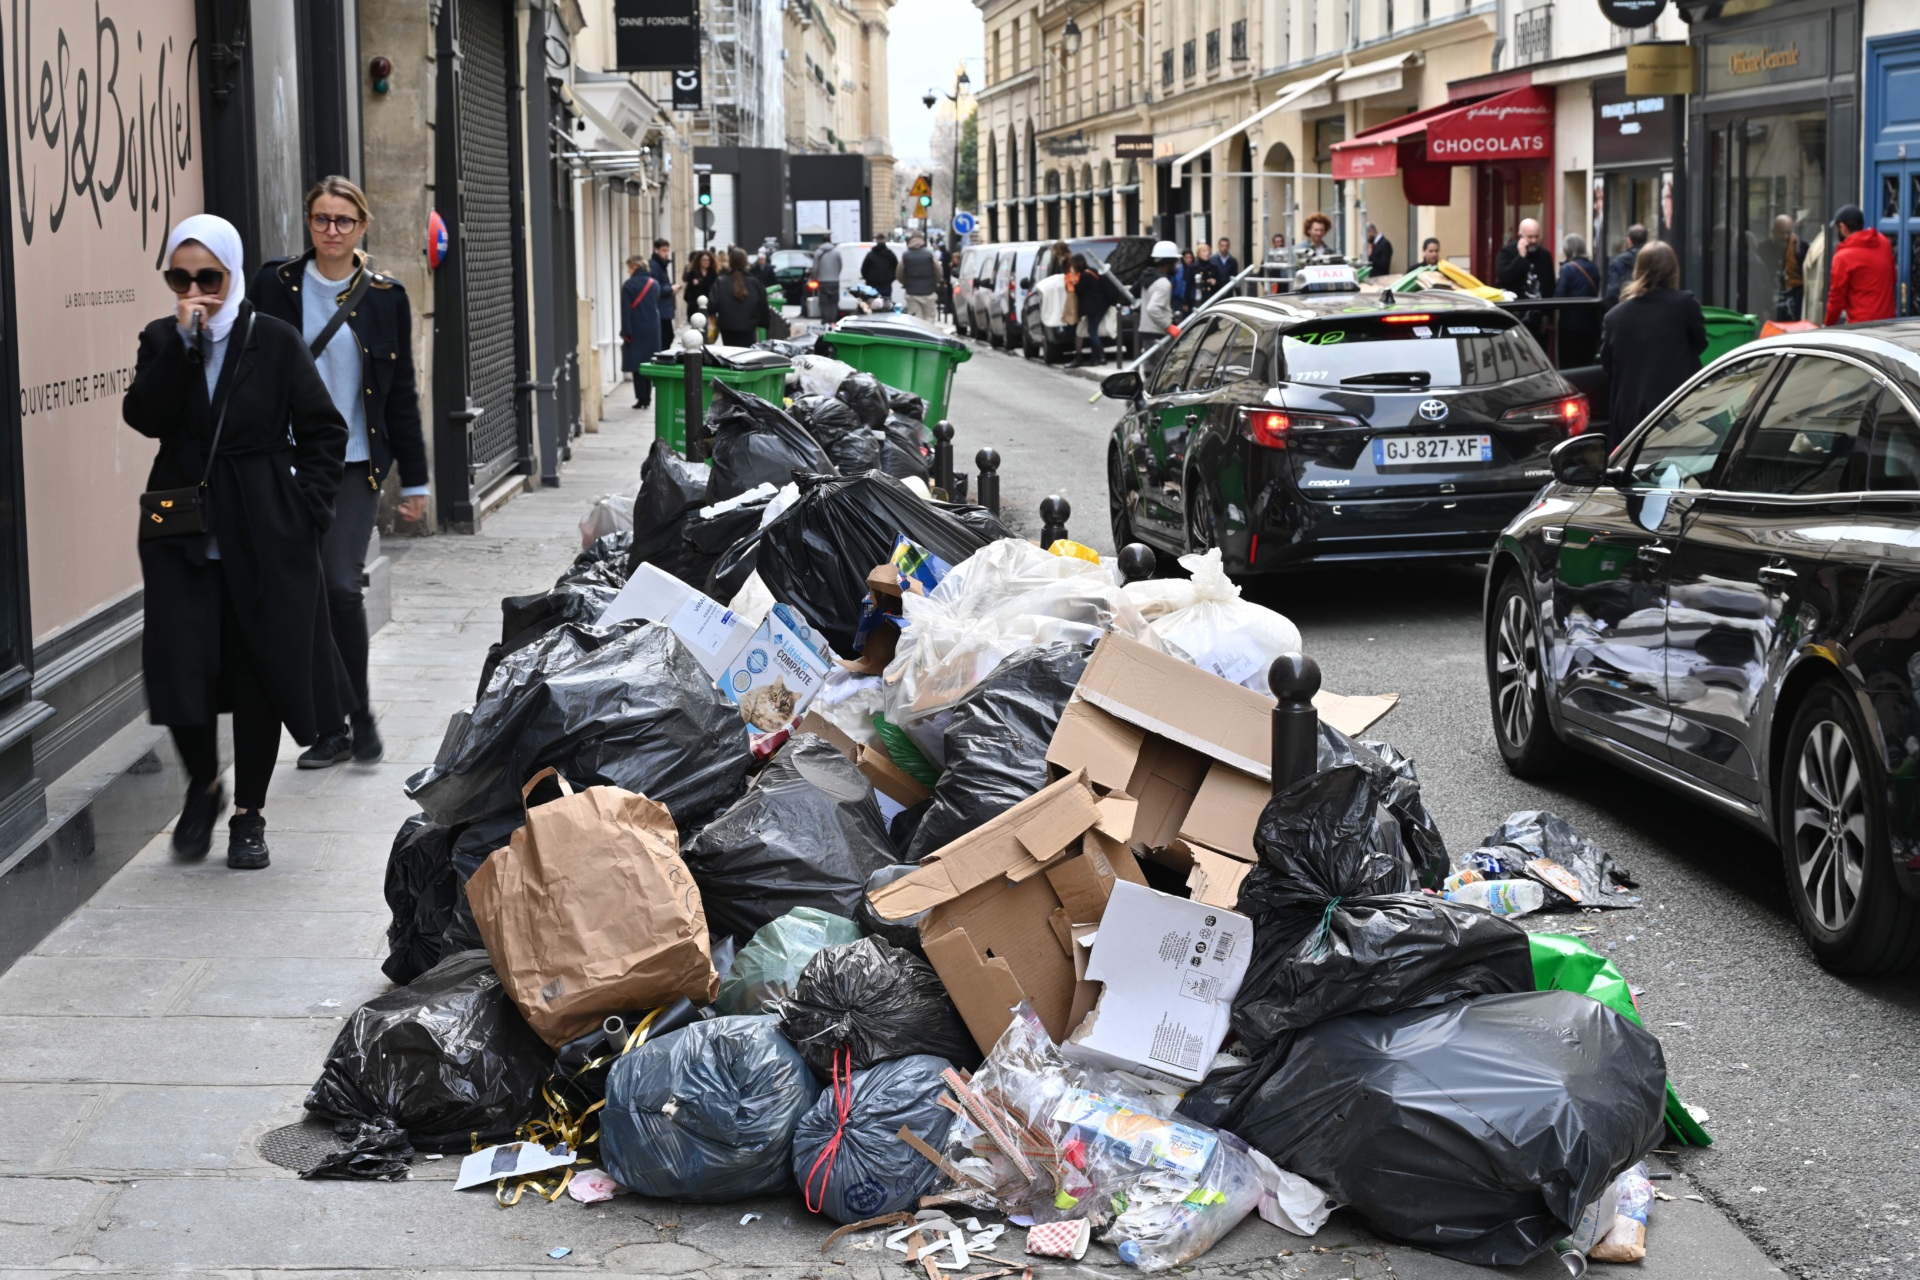 PARIS, FRANCE - MARCH 17: Garbage cans overflowing with trash on the streets as collectors continue their strike in Paris, France on March 17, 2023. Garbage collectors have joined the massive strikes throughout France against pension reform plans. (Photo by Mustafa Yalcin/Anadolu Agency via Getty Images)